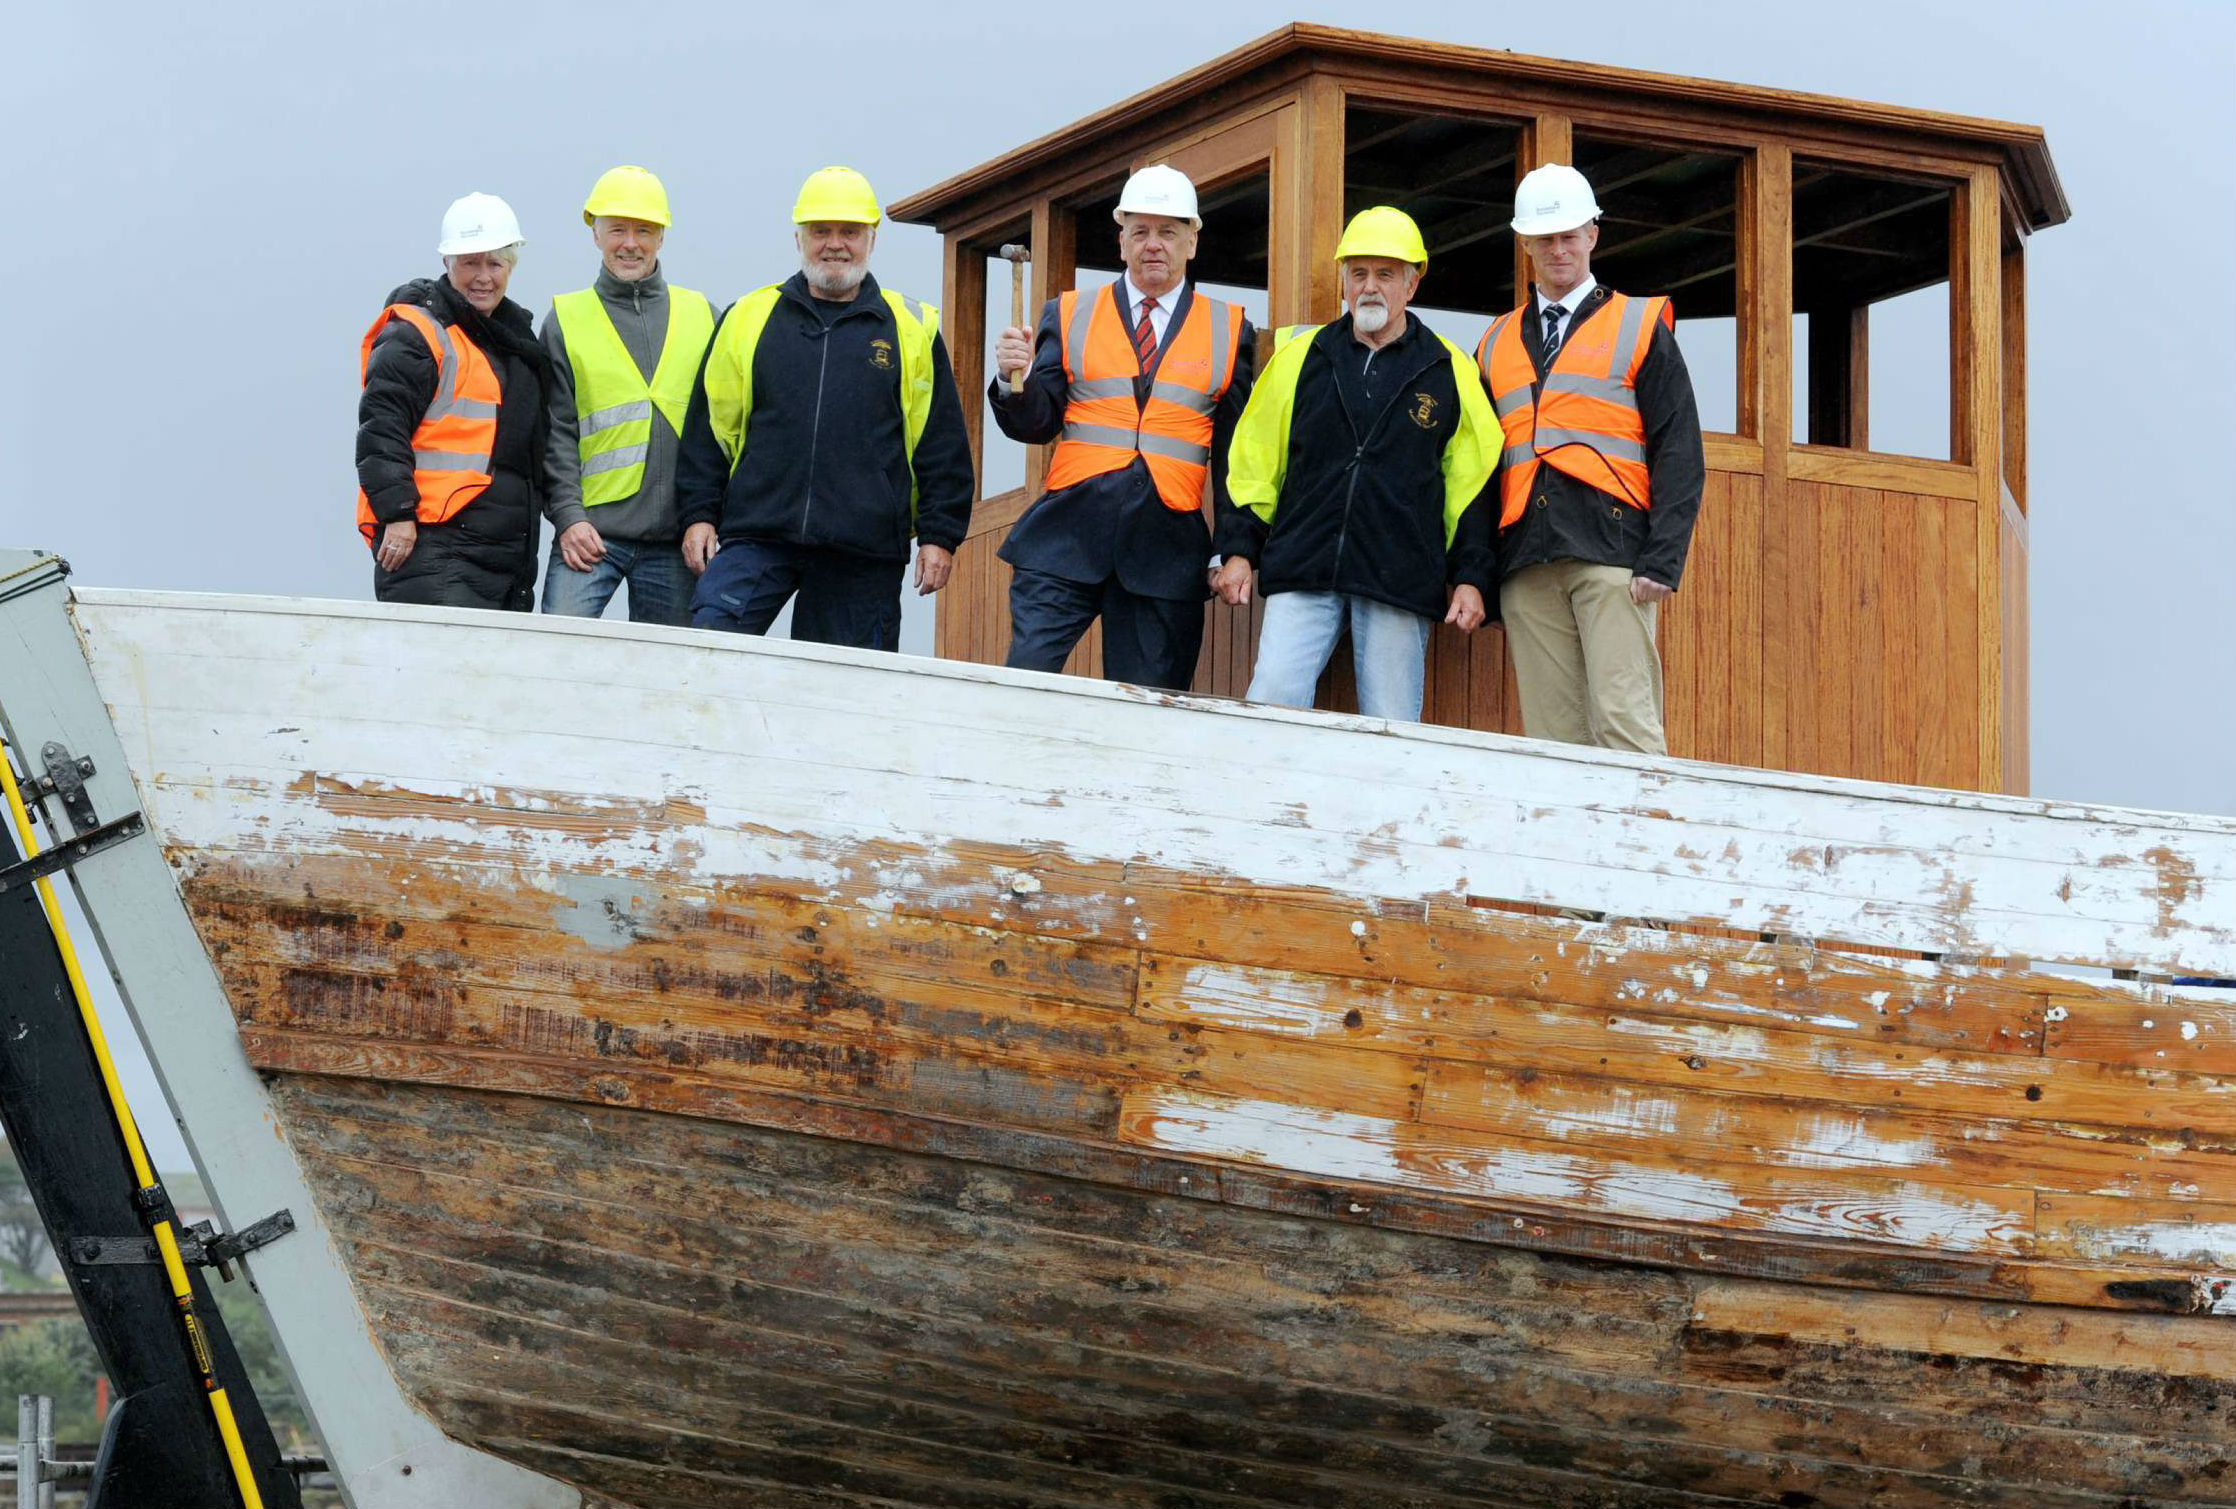 Key plank of Dunkirk 'little ship' nailed down as part of North-East restoration project - The Northern Echo (registration)